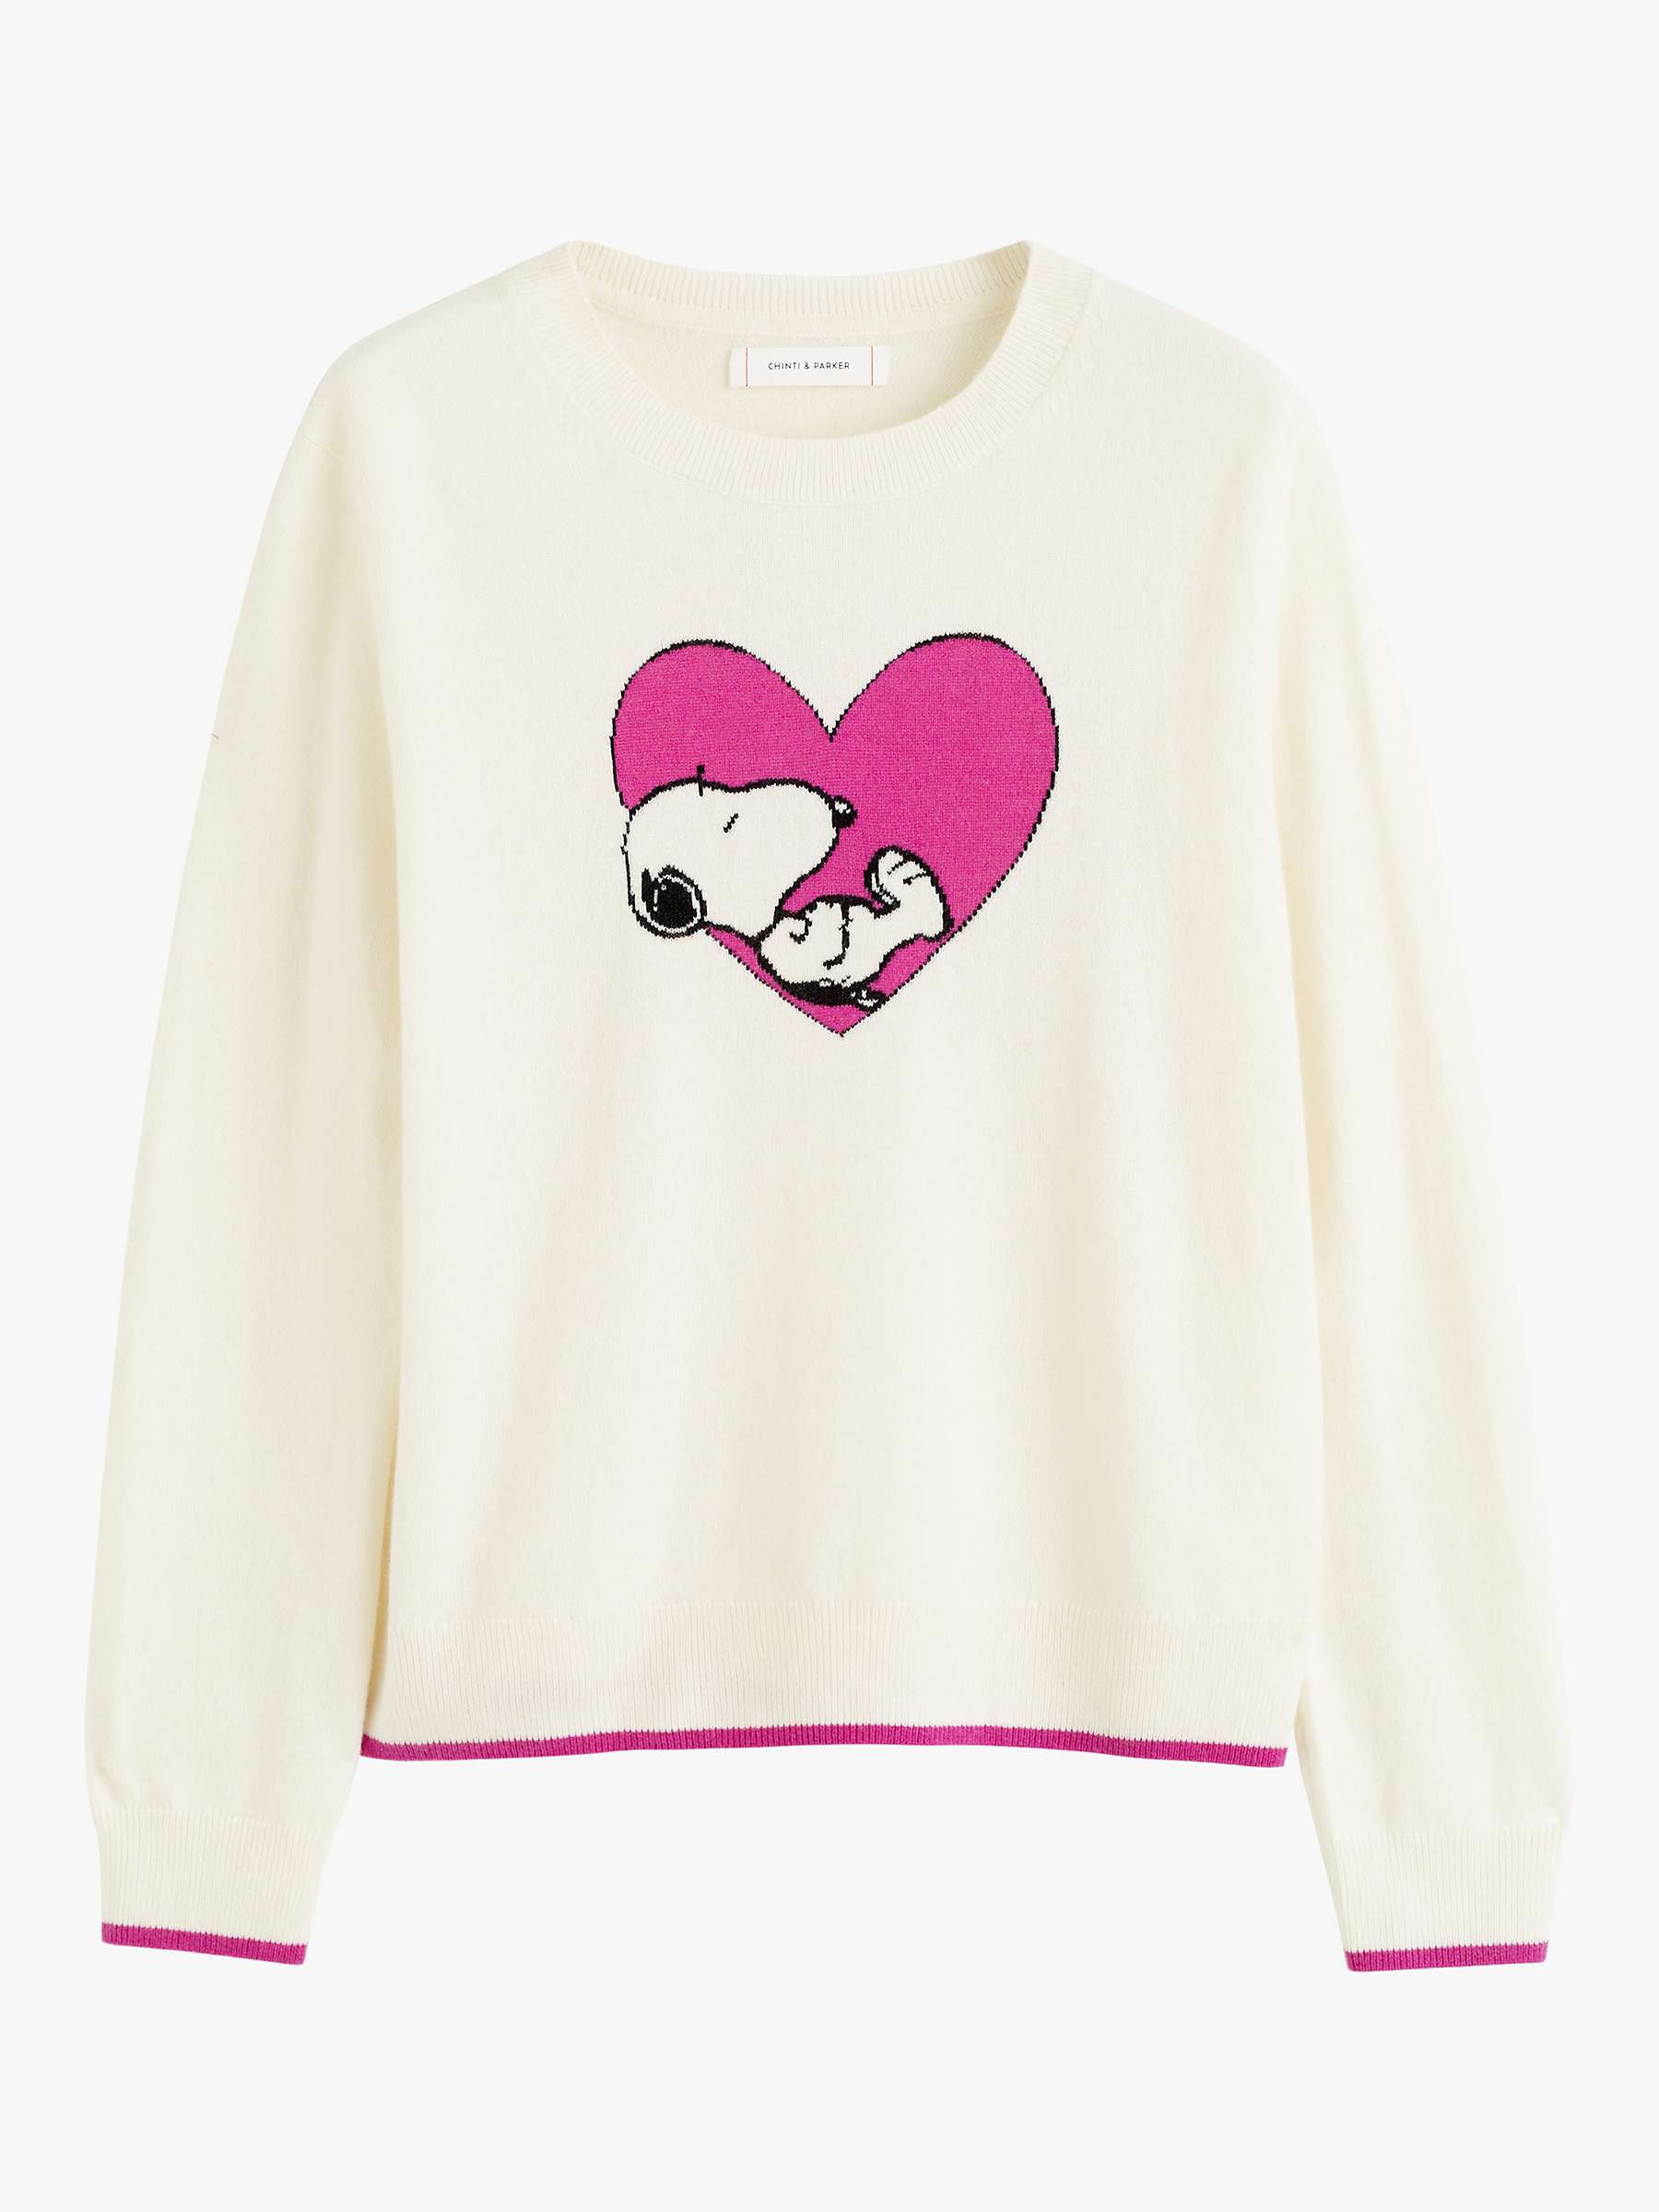 Buy Chinti & Parker Wool and Cashmere Blend Snoopy Love Jumper, Cream/Berry Online at johnlewis.com